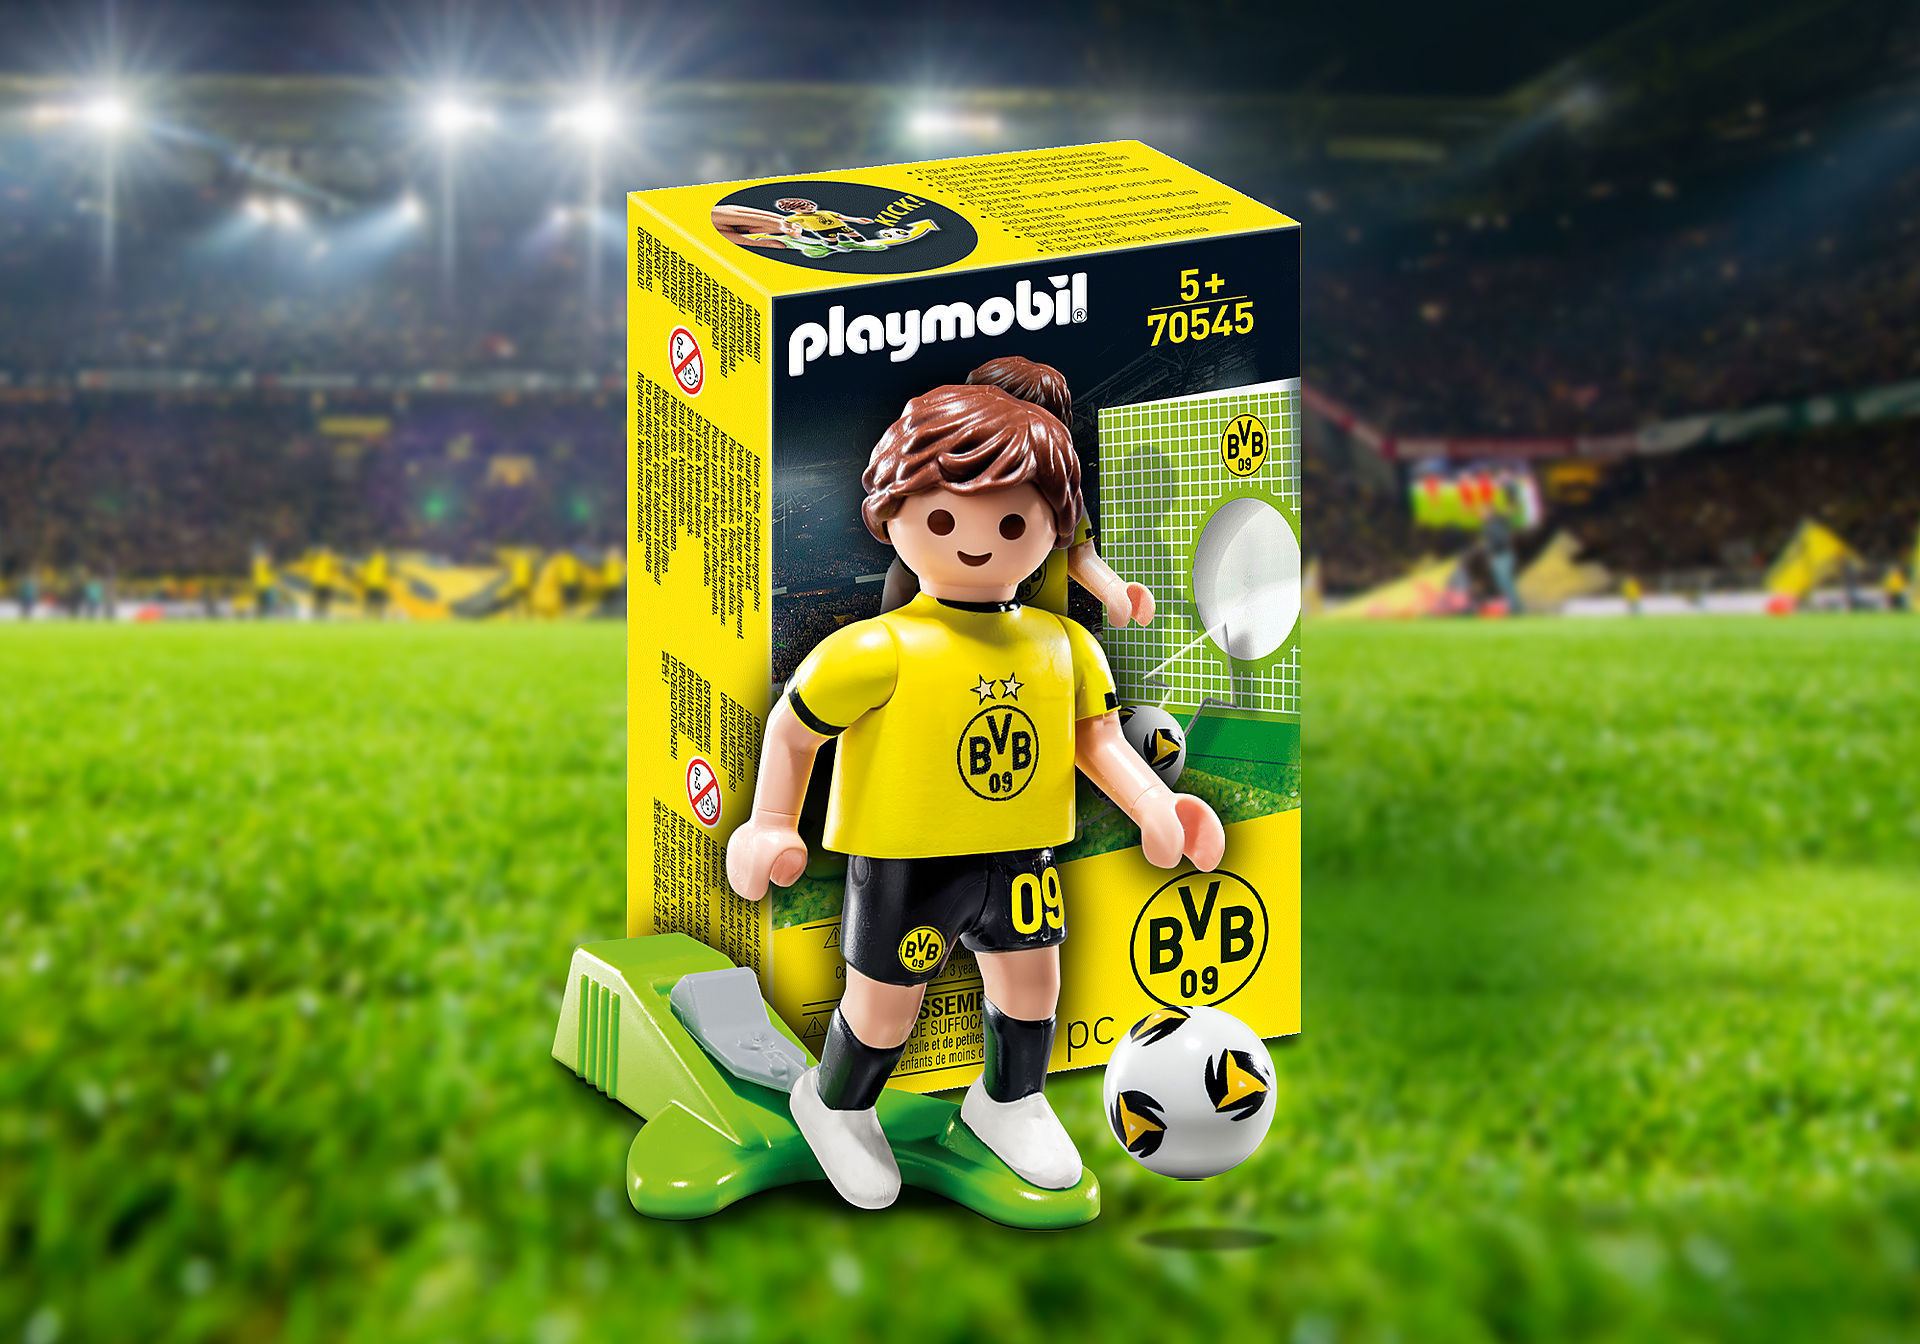 70545 Promo BVB voetballers zoom image1